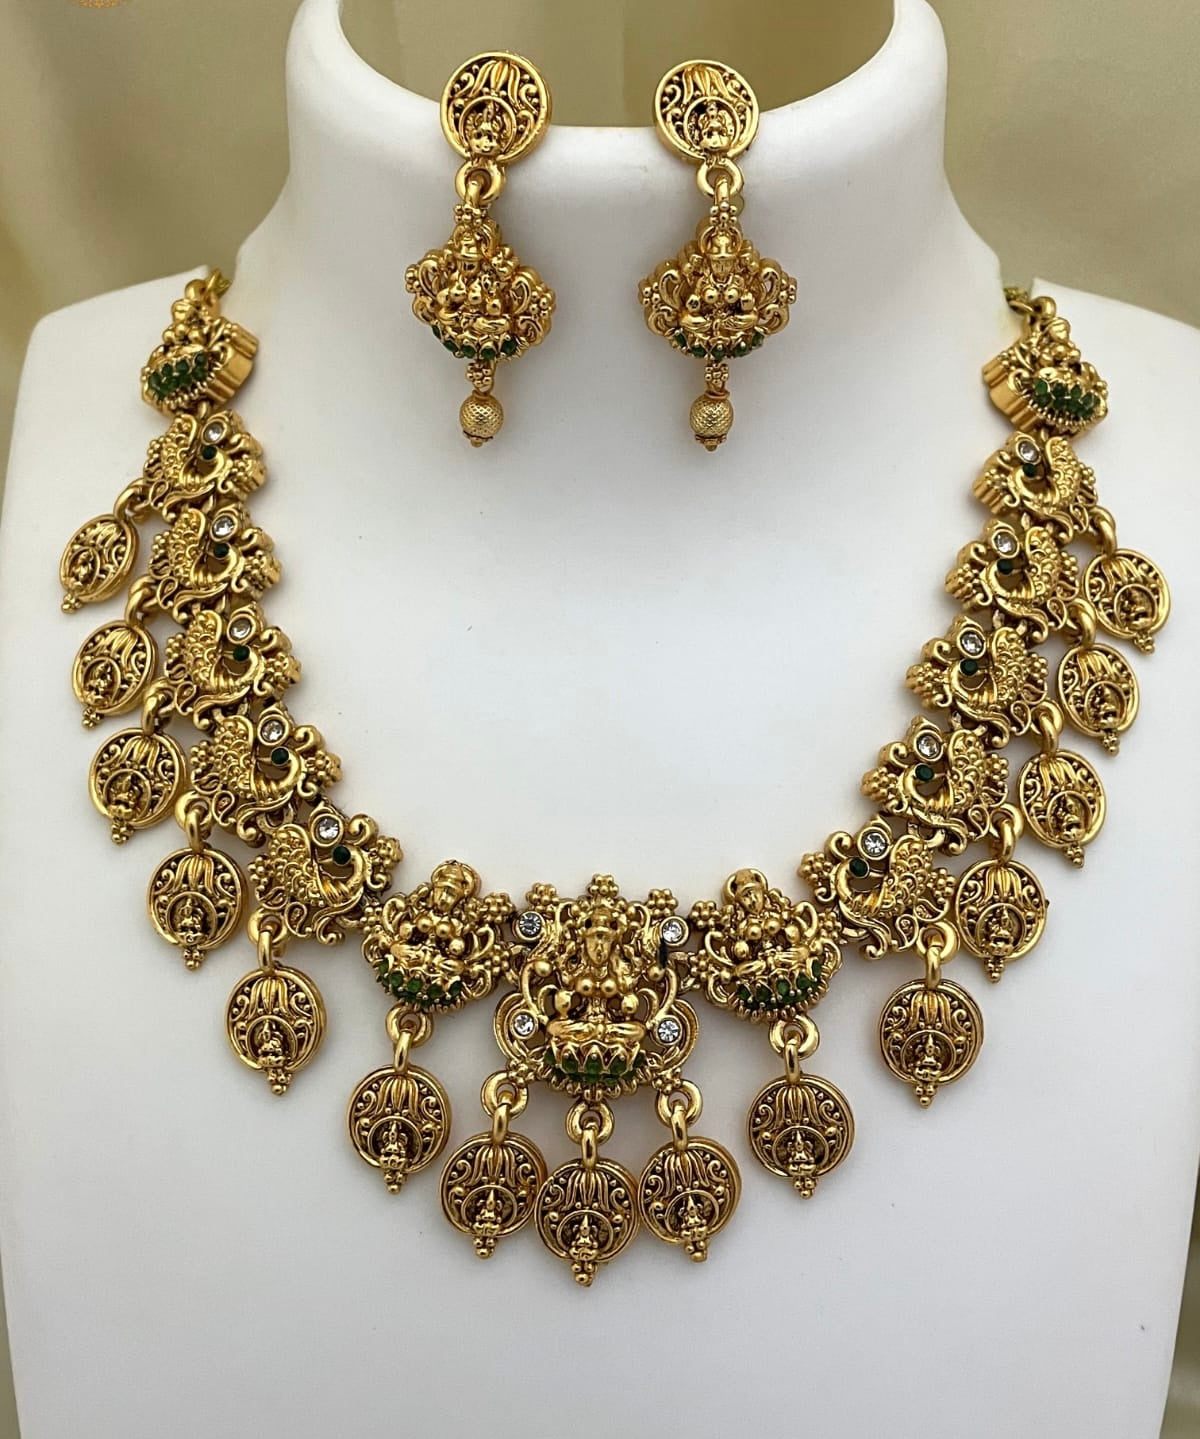 New Peacock Design Matte Finish Lakshmi Coin Necklace Set with Earrings